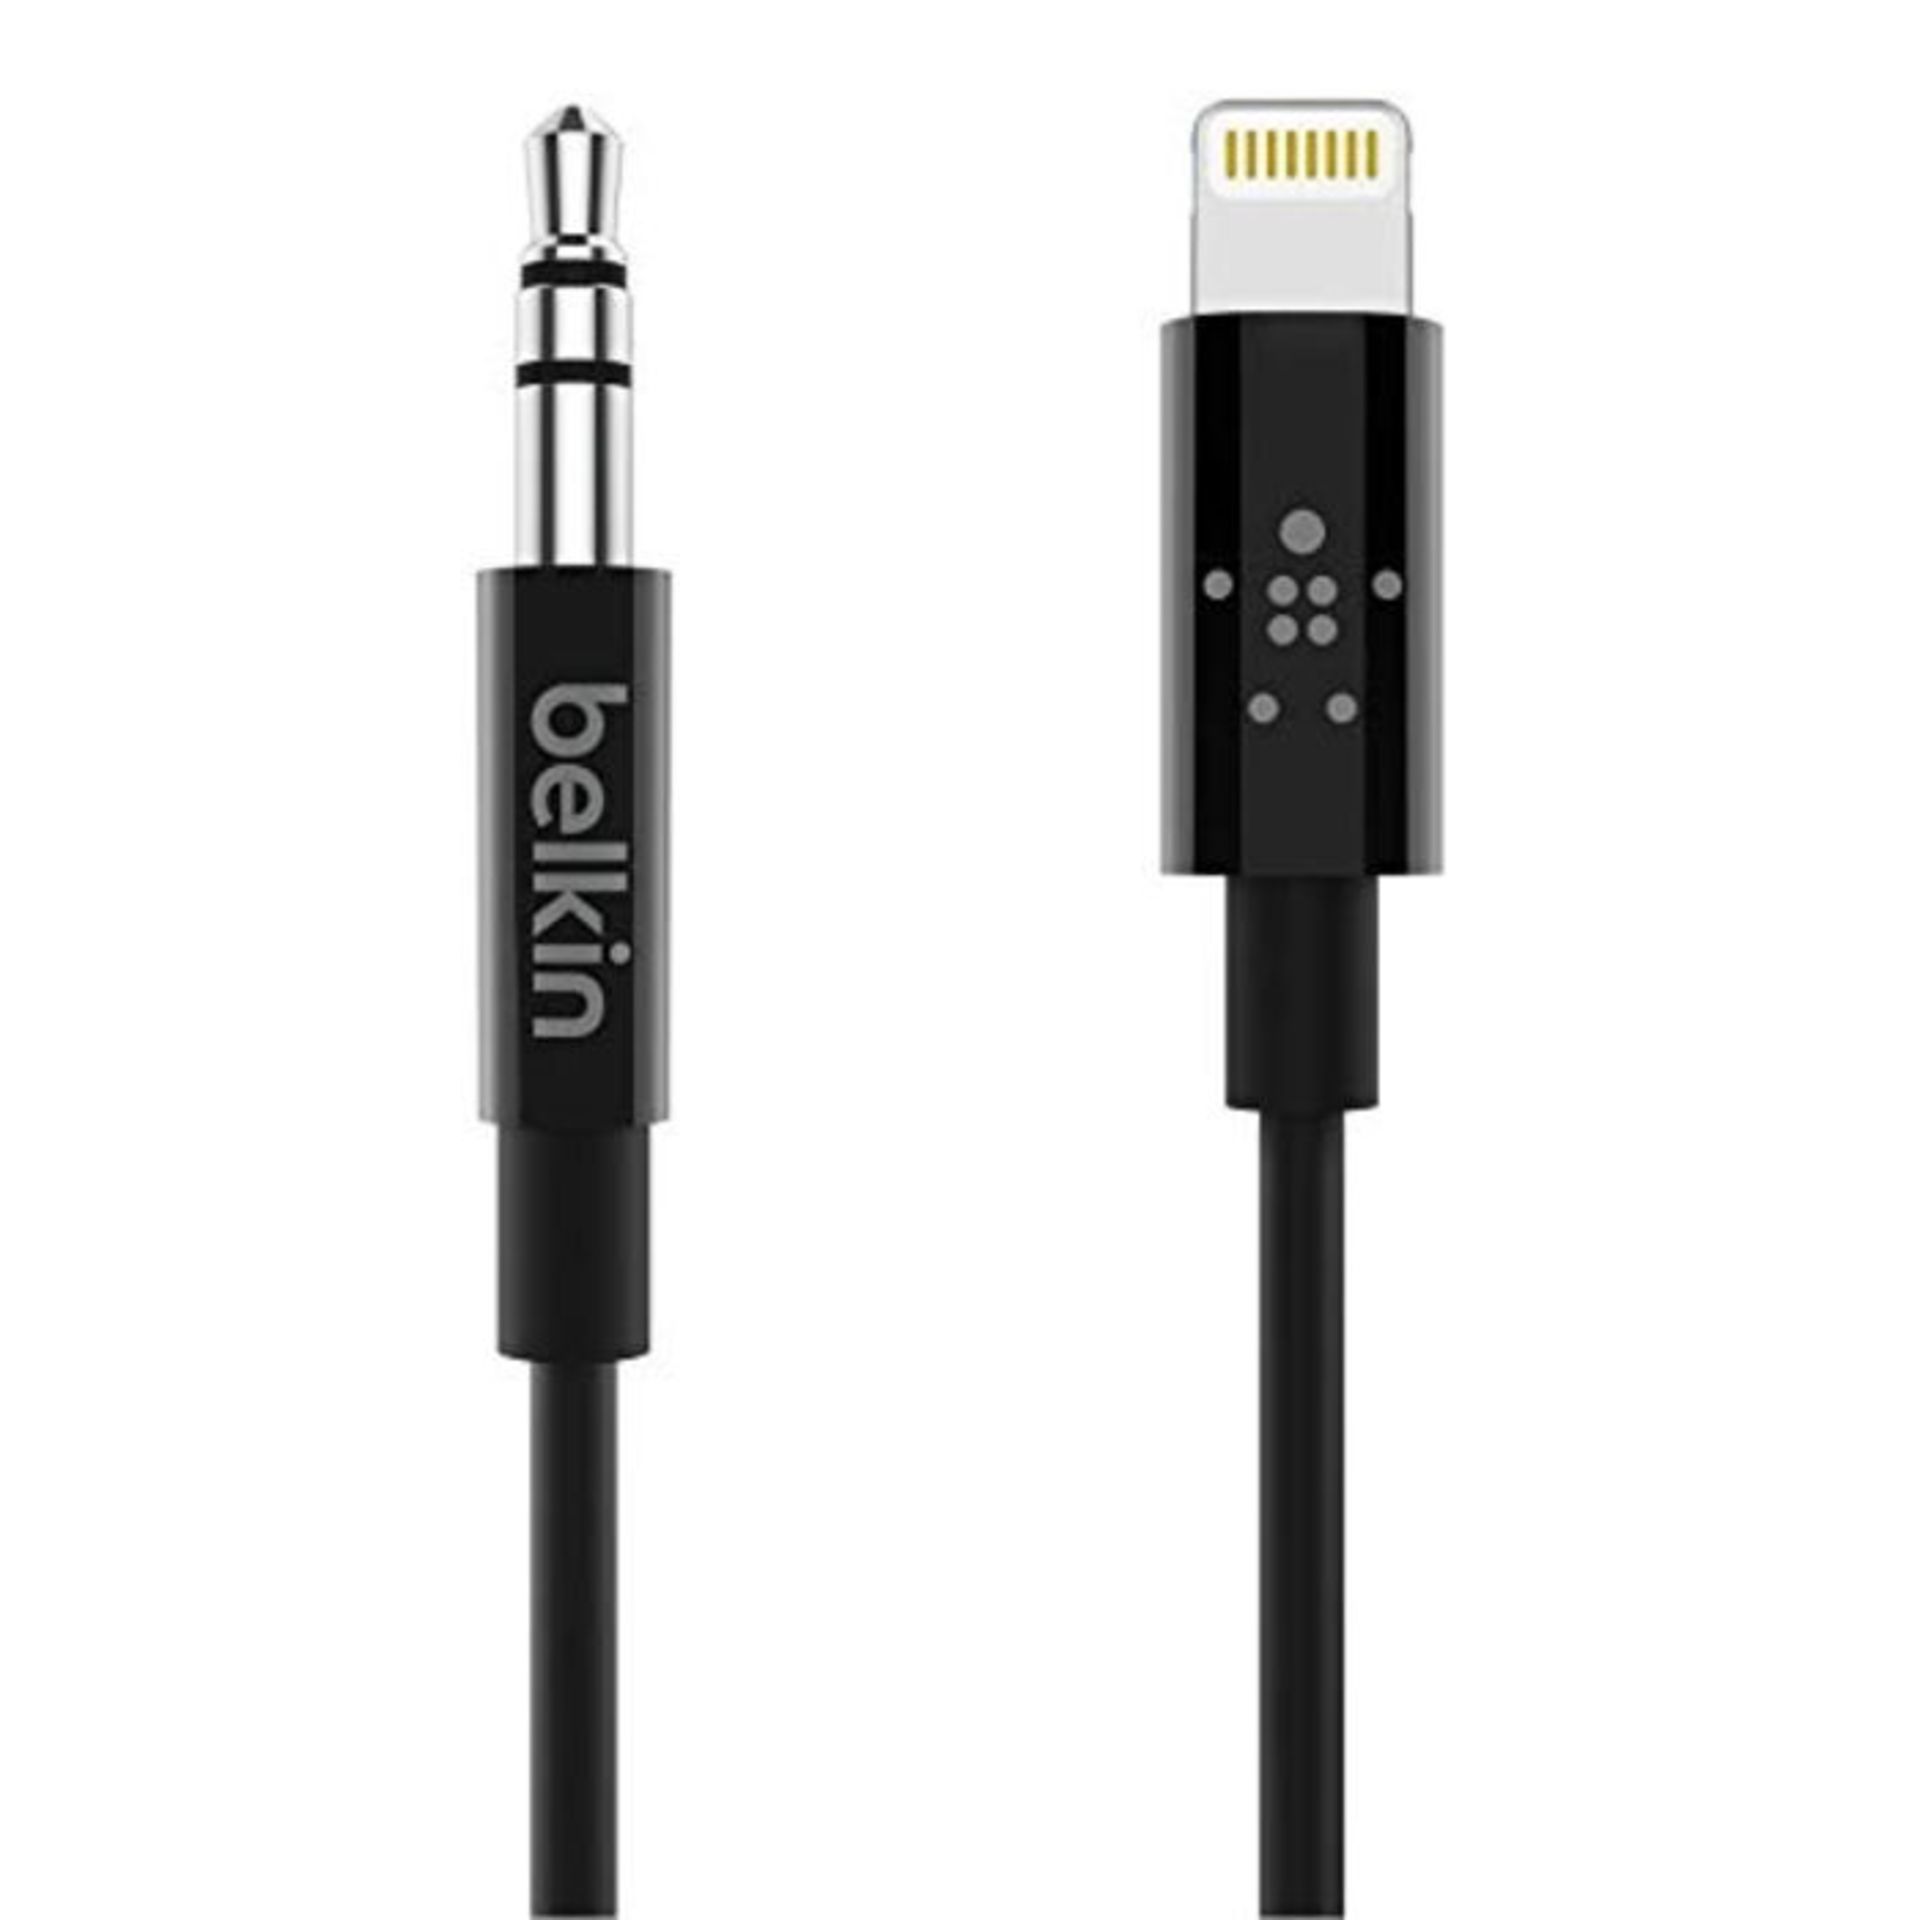 Belkin 3 ft/0.9 m 3.5 mm Audio Cable with Lightning Connector - MFi-Certified Lightnin